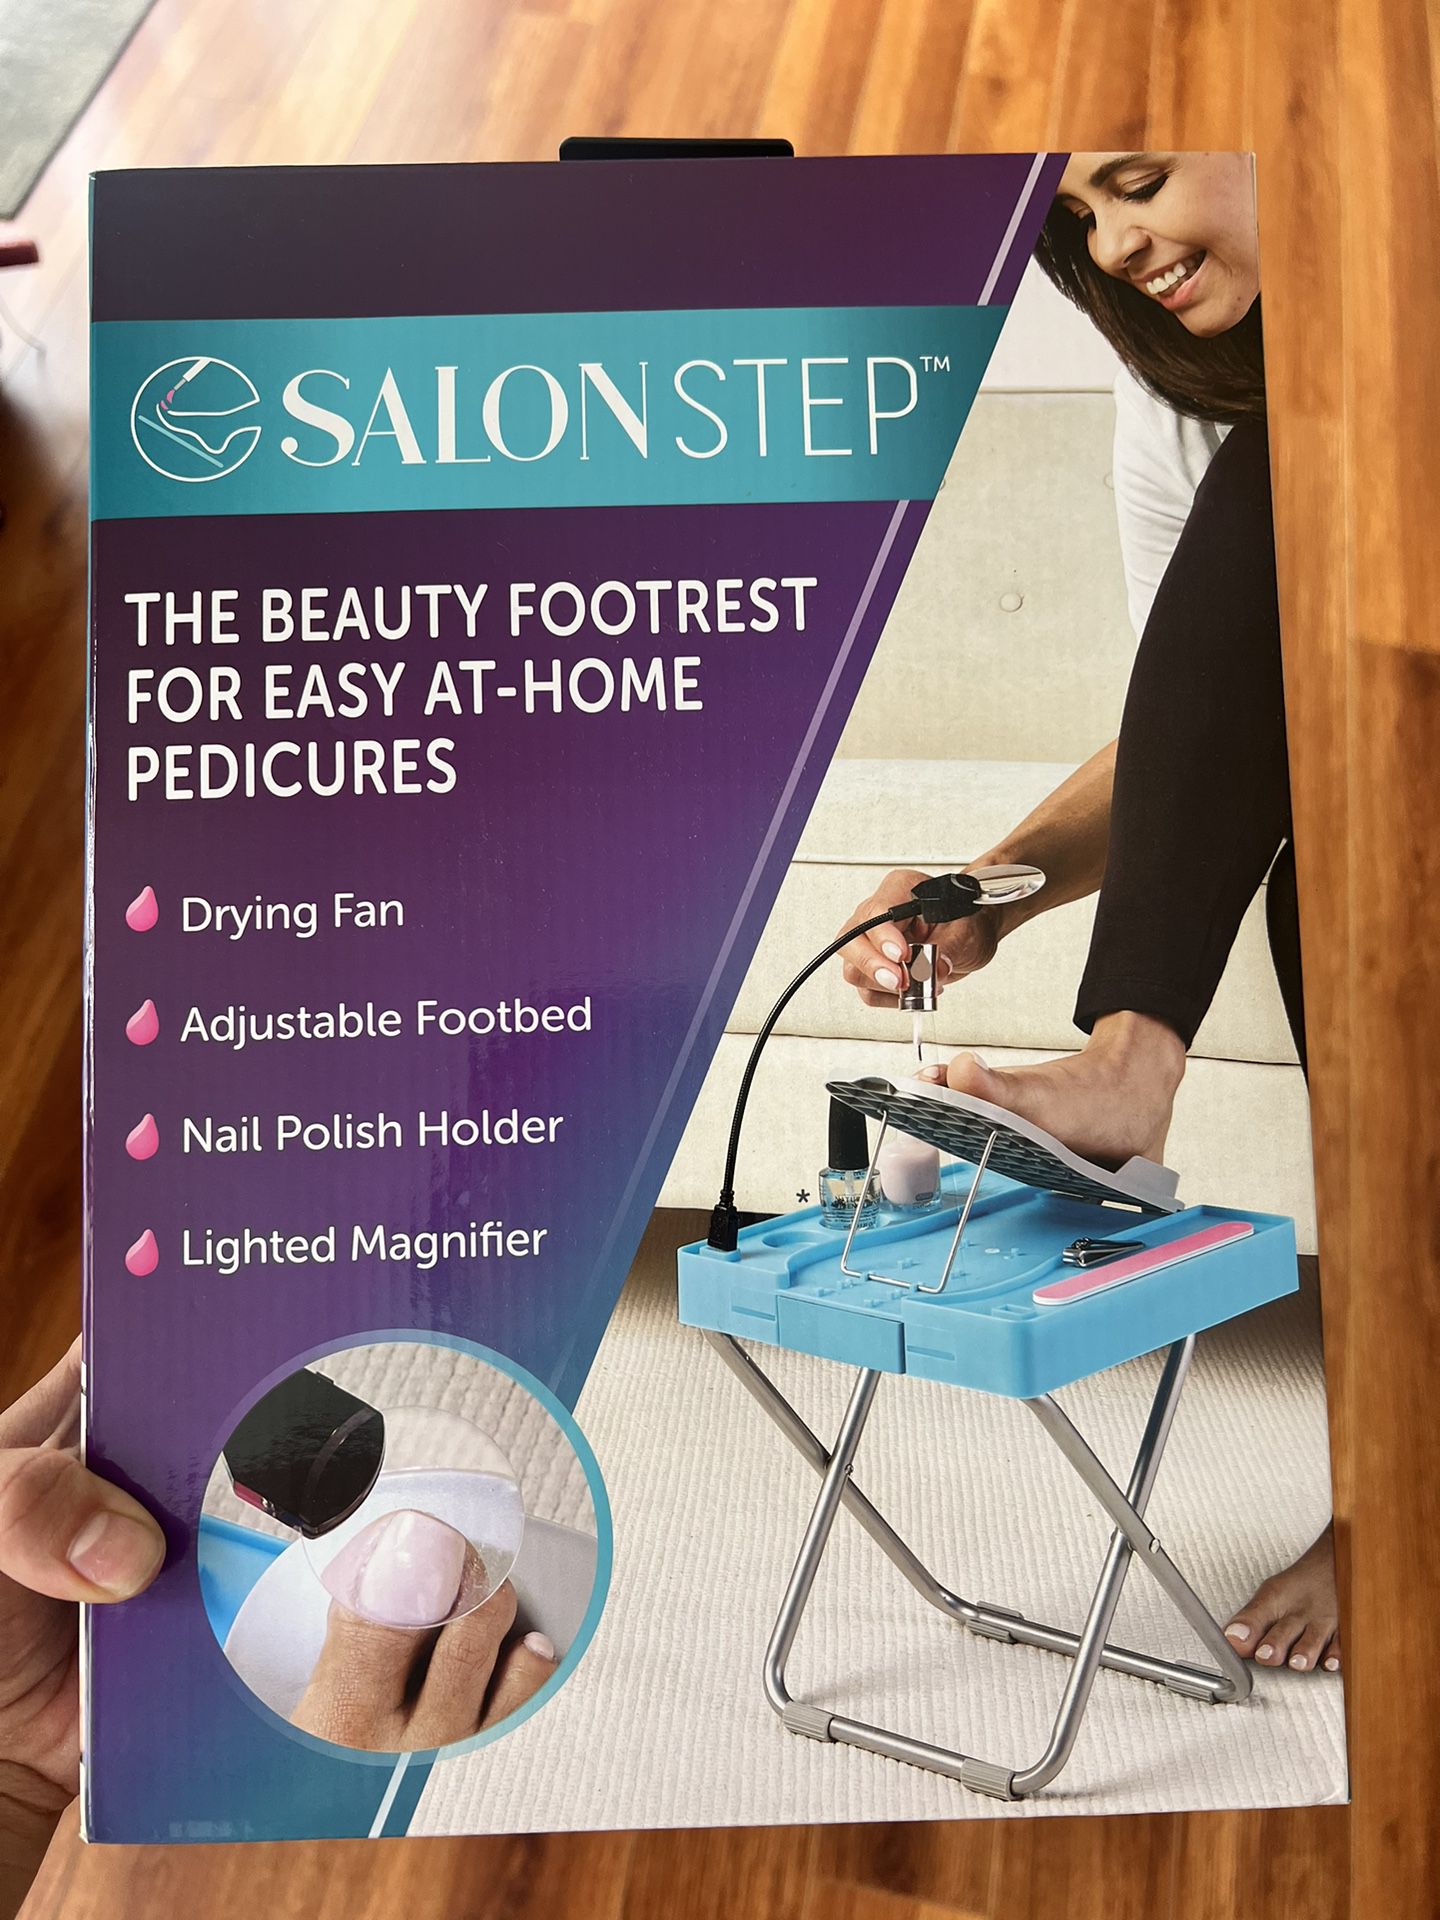 THE BEAUTY FOOTREST FOR EASY AT-HOME PEDICURES